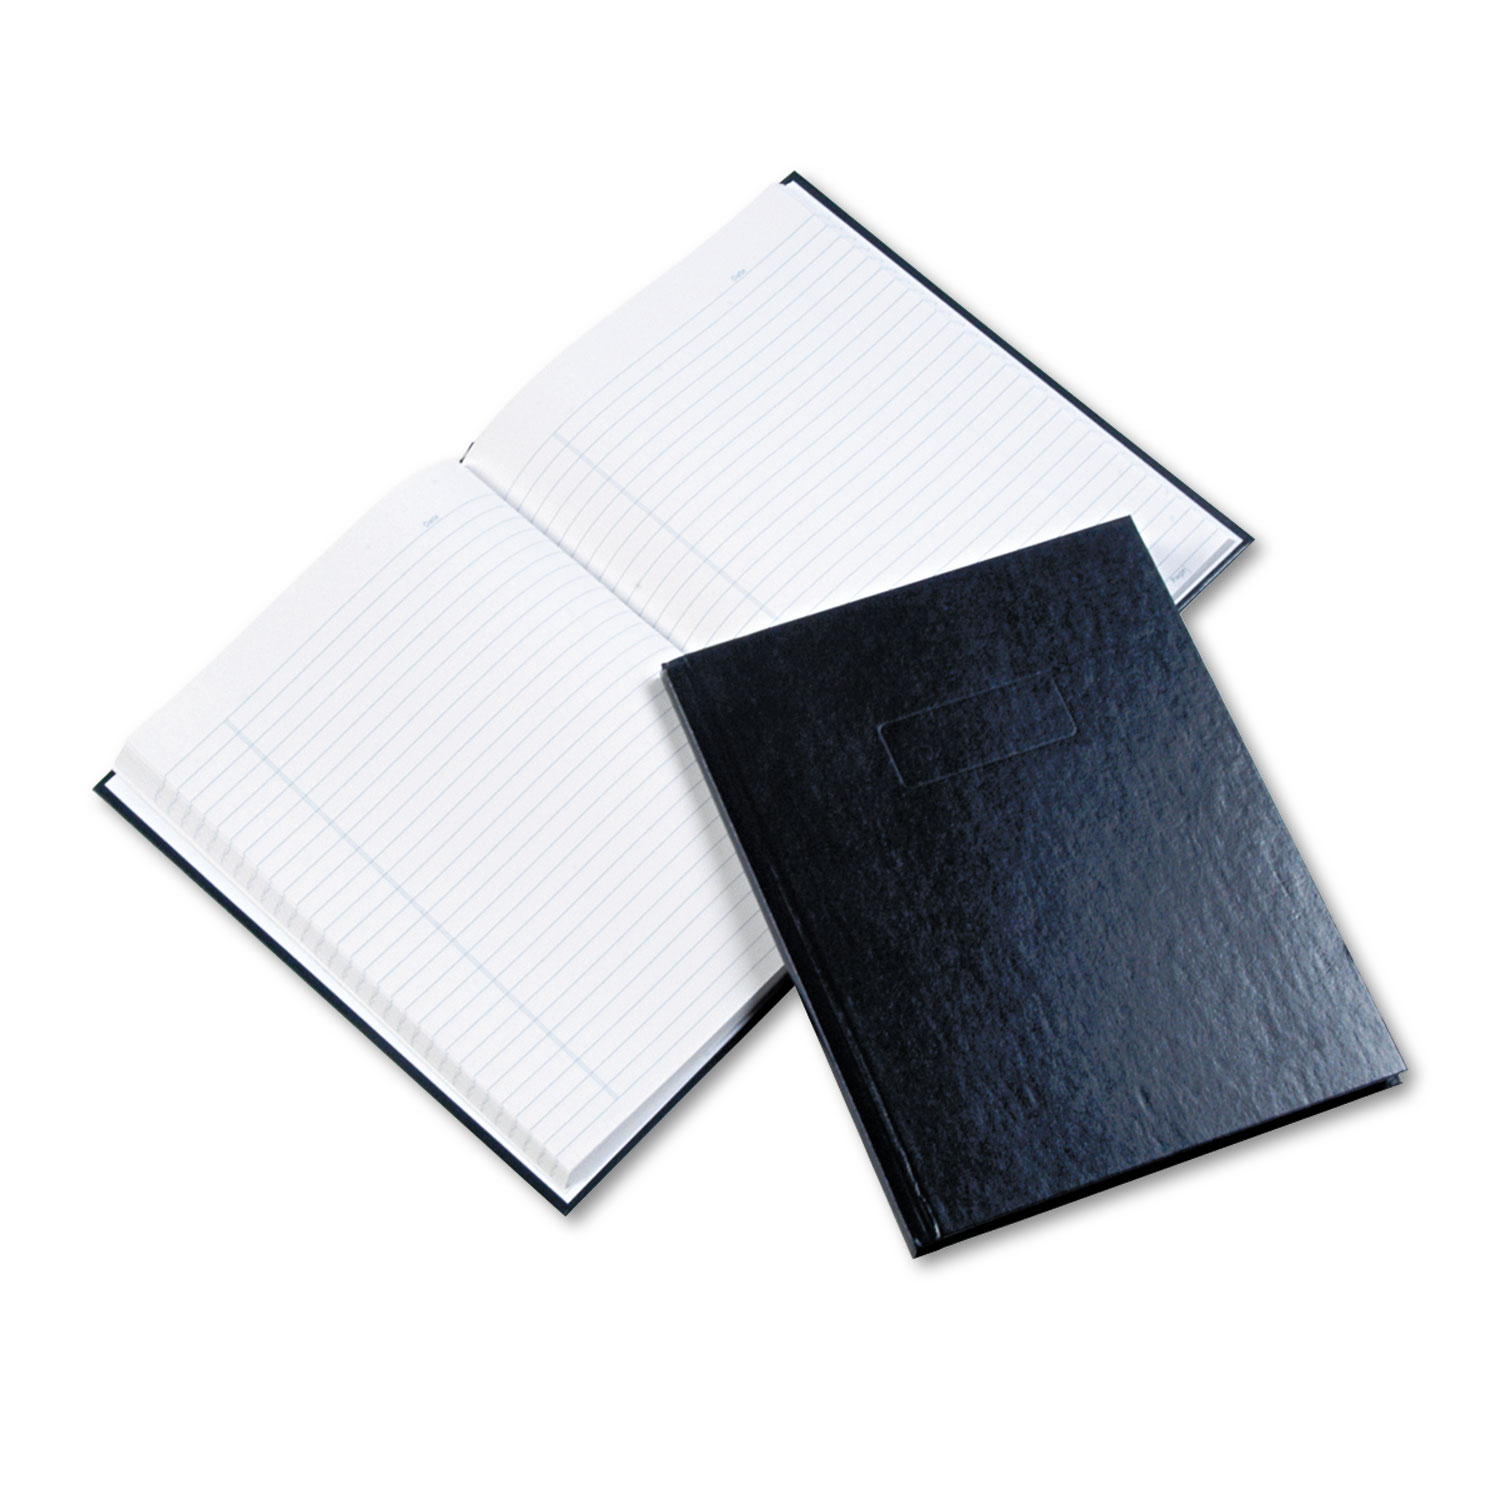  Blueline A9.82 Business Notebook, Medium/College Rule, Blue Cover, 9.25 x 7.25, 192 Sheets (REDA982) 